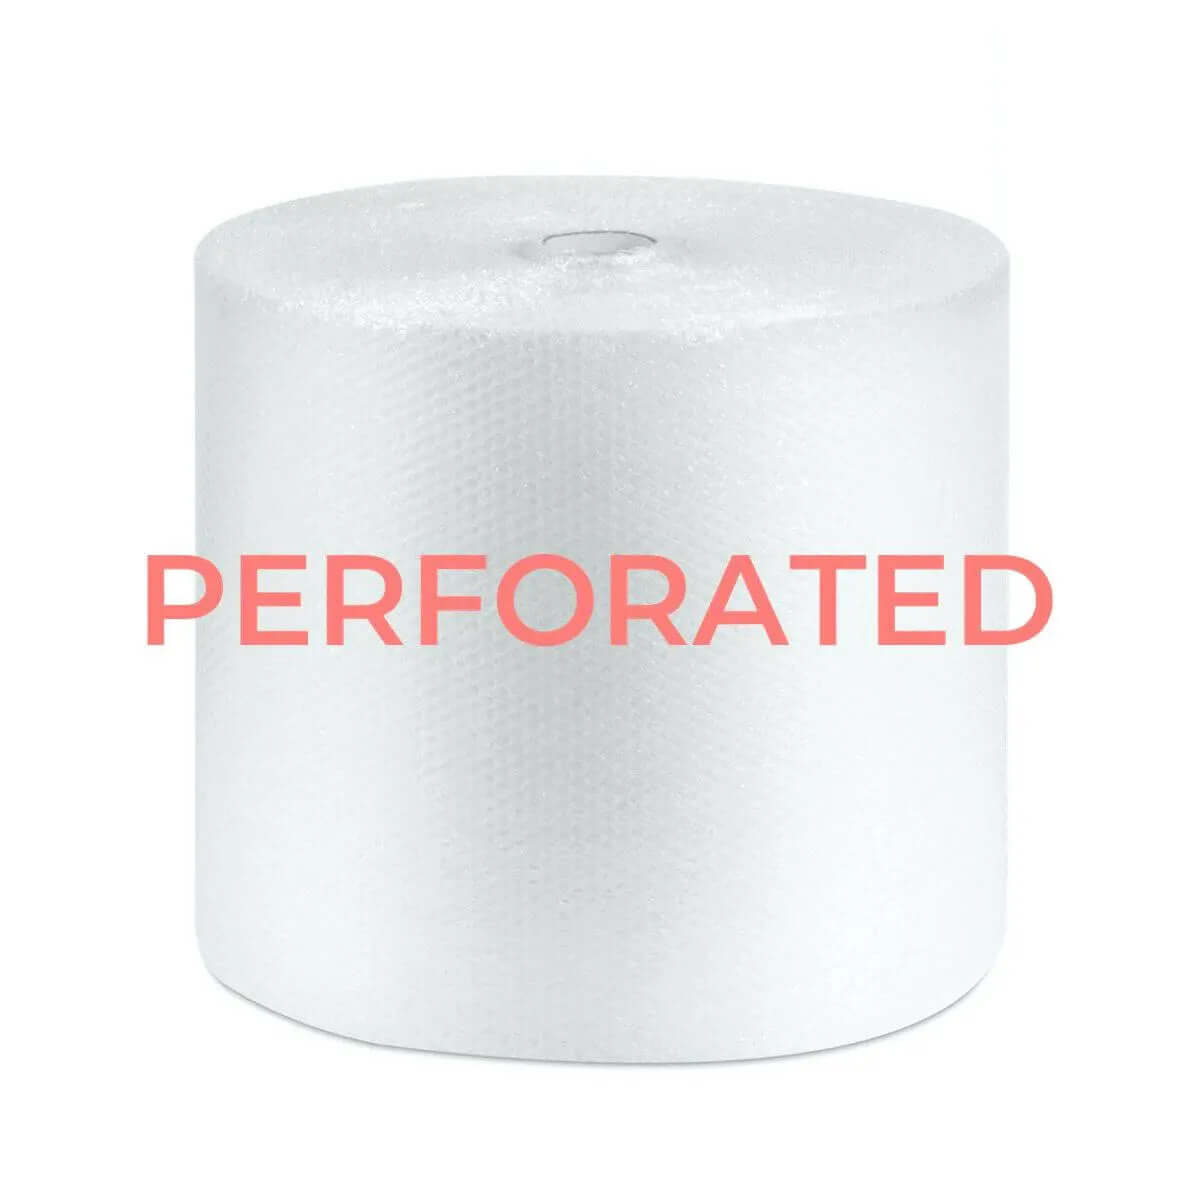 Perforated Bubble Wrap Roll - 250mm x 50m   Bubble Wrap Packstore Australia Packstore